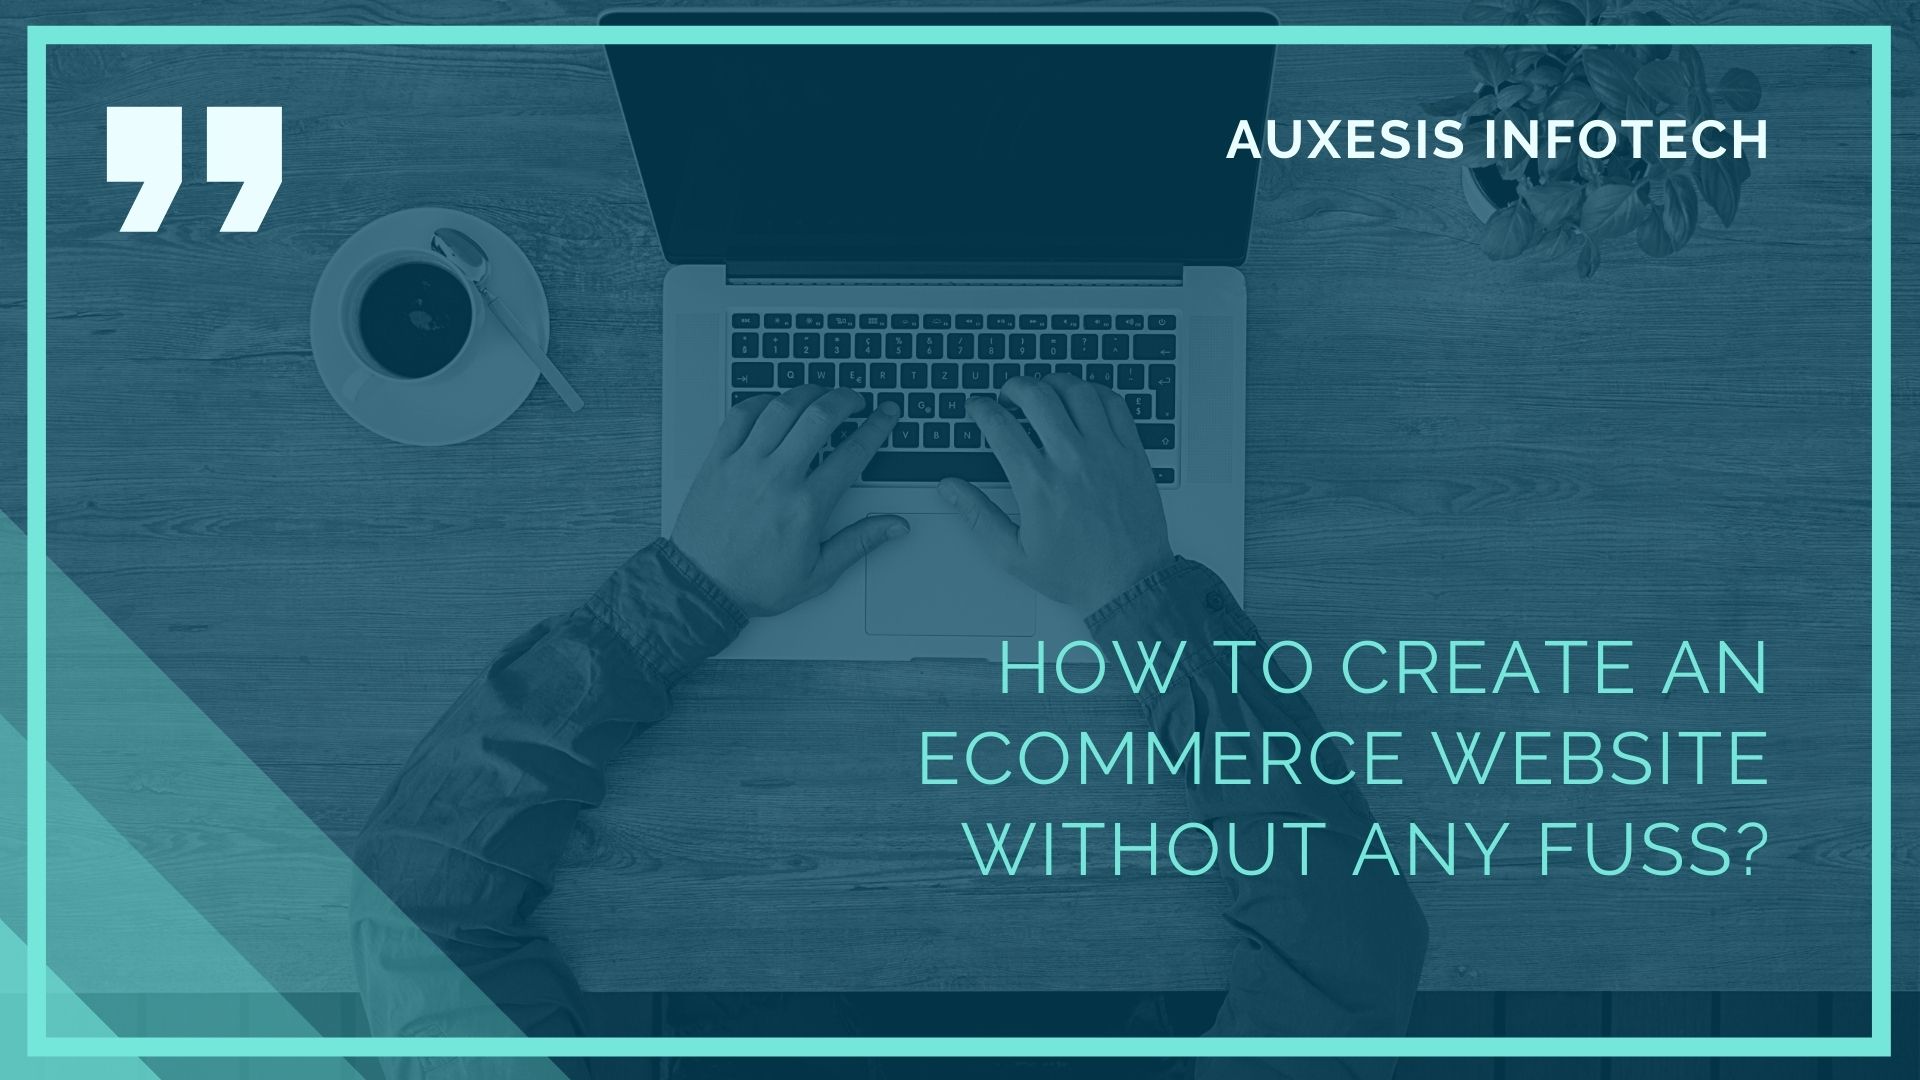 How to create an eCommerce website without any fuss? - auxesisinfotechsite